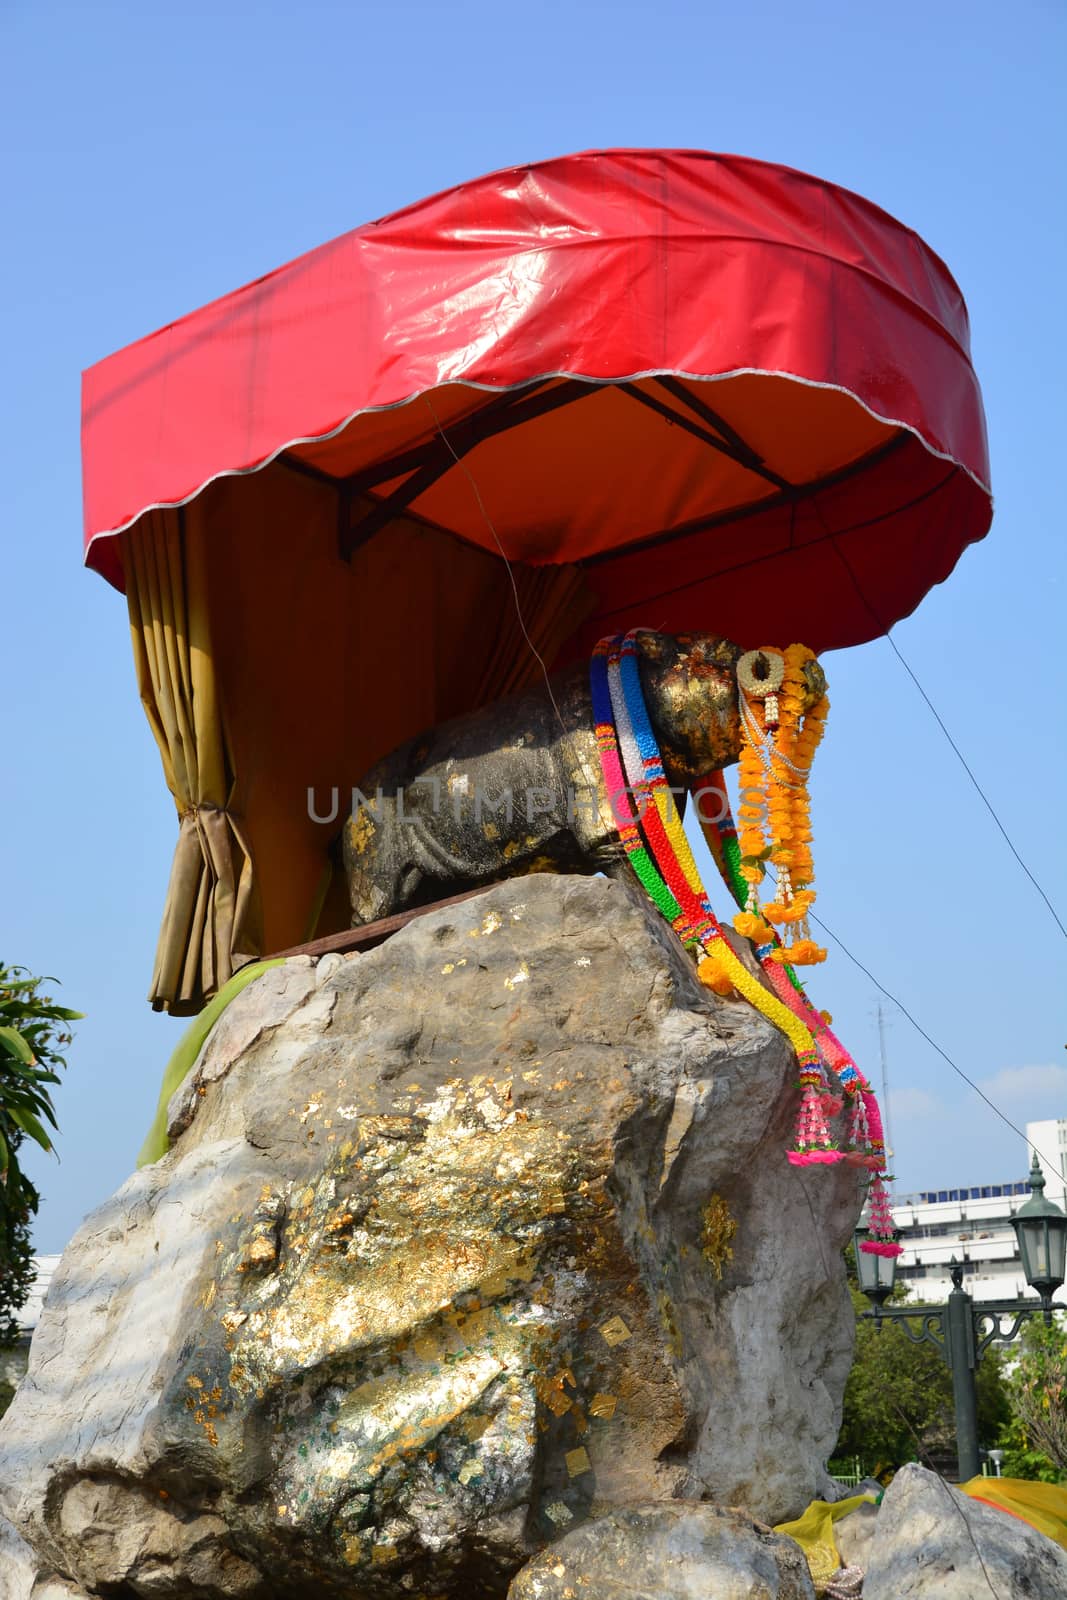 BANGKOK – FEBRUARY 14, 2019 : (Pig Memorial) The Sahachat Memorial was built in 1913 by three members of the Siamese royal family to honour Queen Sri Phatcharinthra’s 50th birthday.